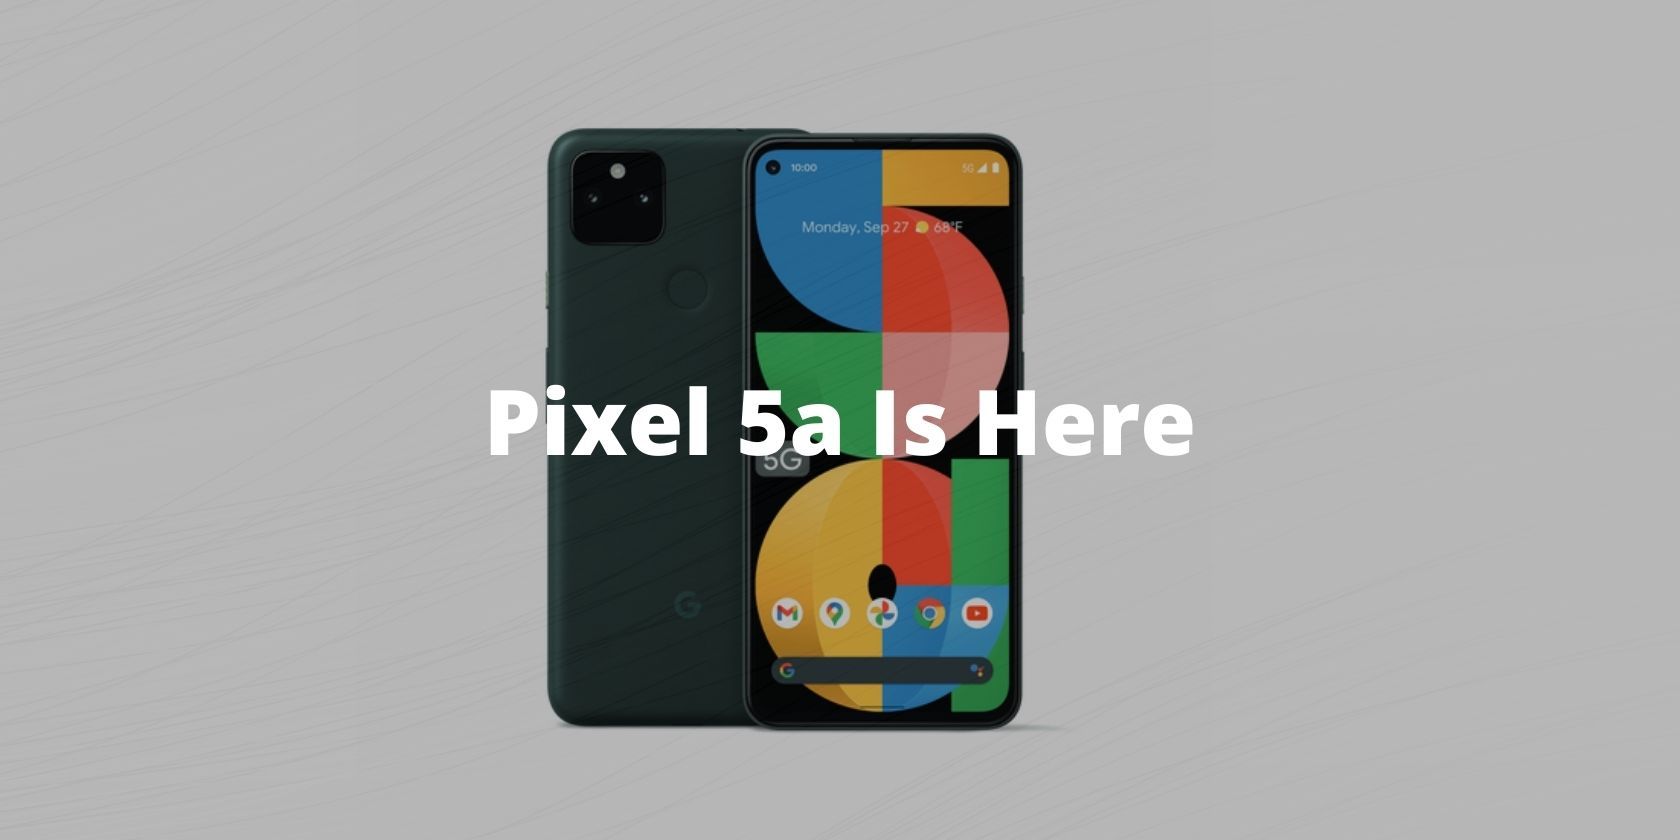 The Google Pixel 5a Packs a Big Display and Battery, 5G, and IP67